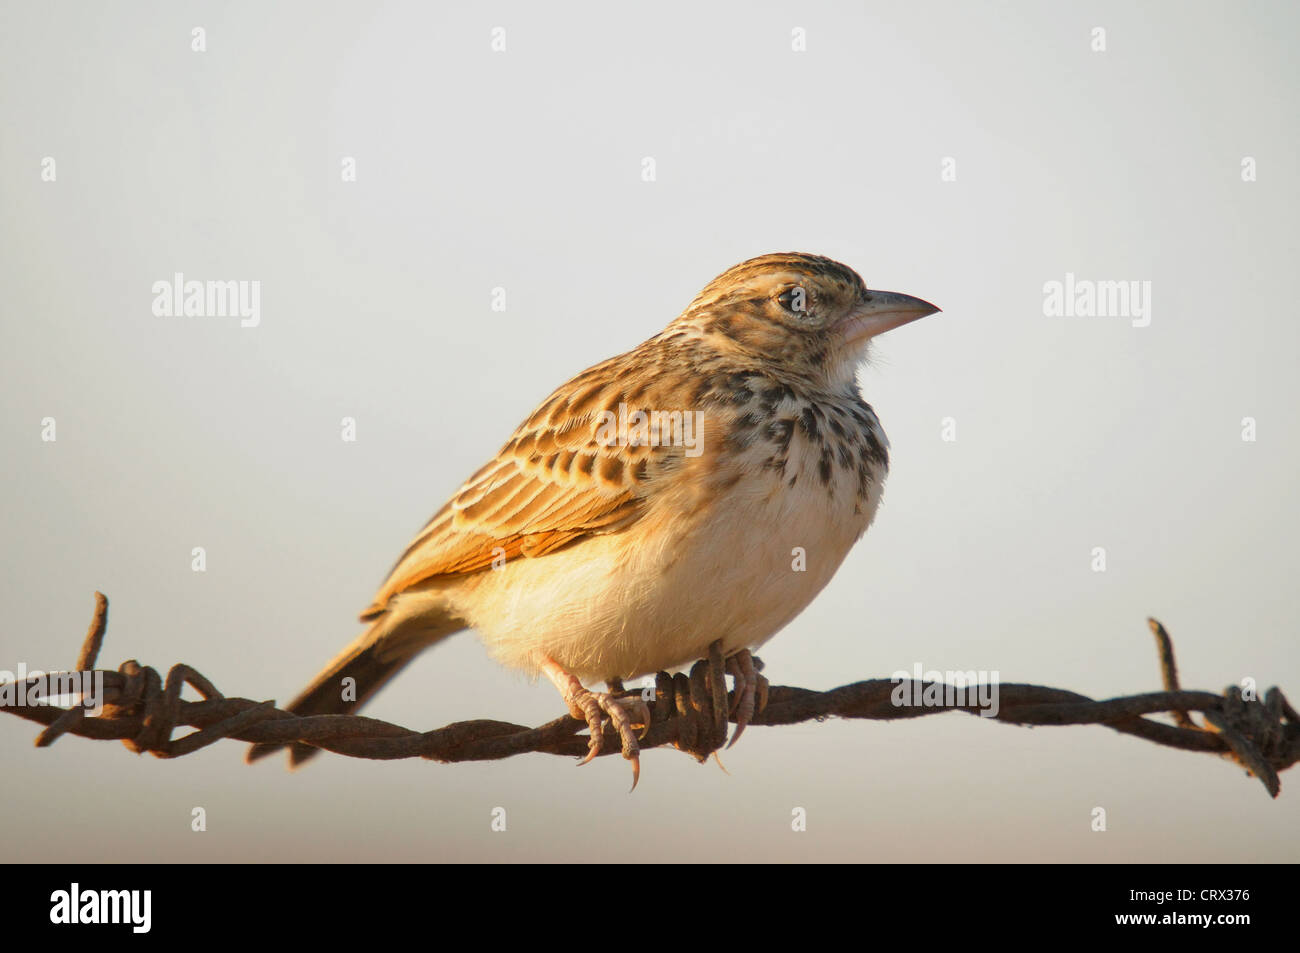 Indian Bush Lark (Mirafra erythroptera) is a species of bushlark found in South Asia mainly in India. Stock Photo